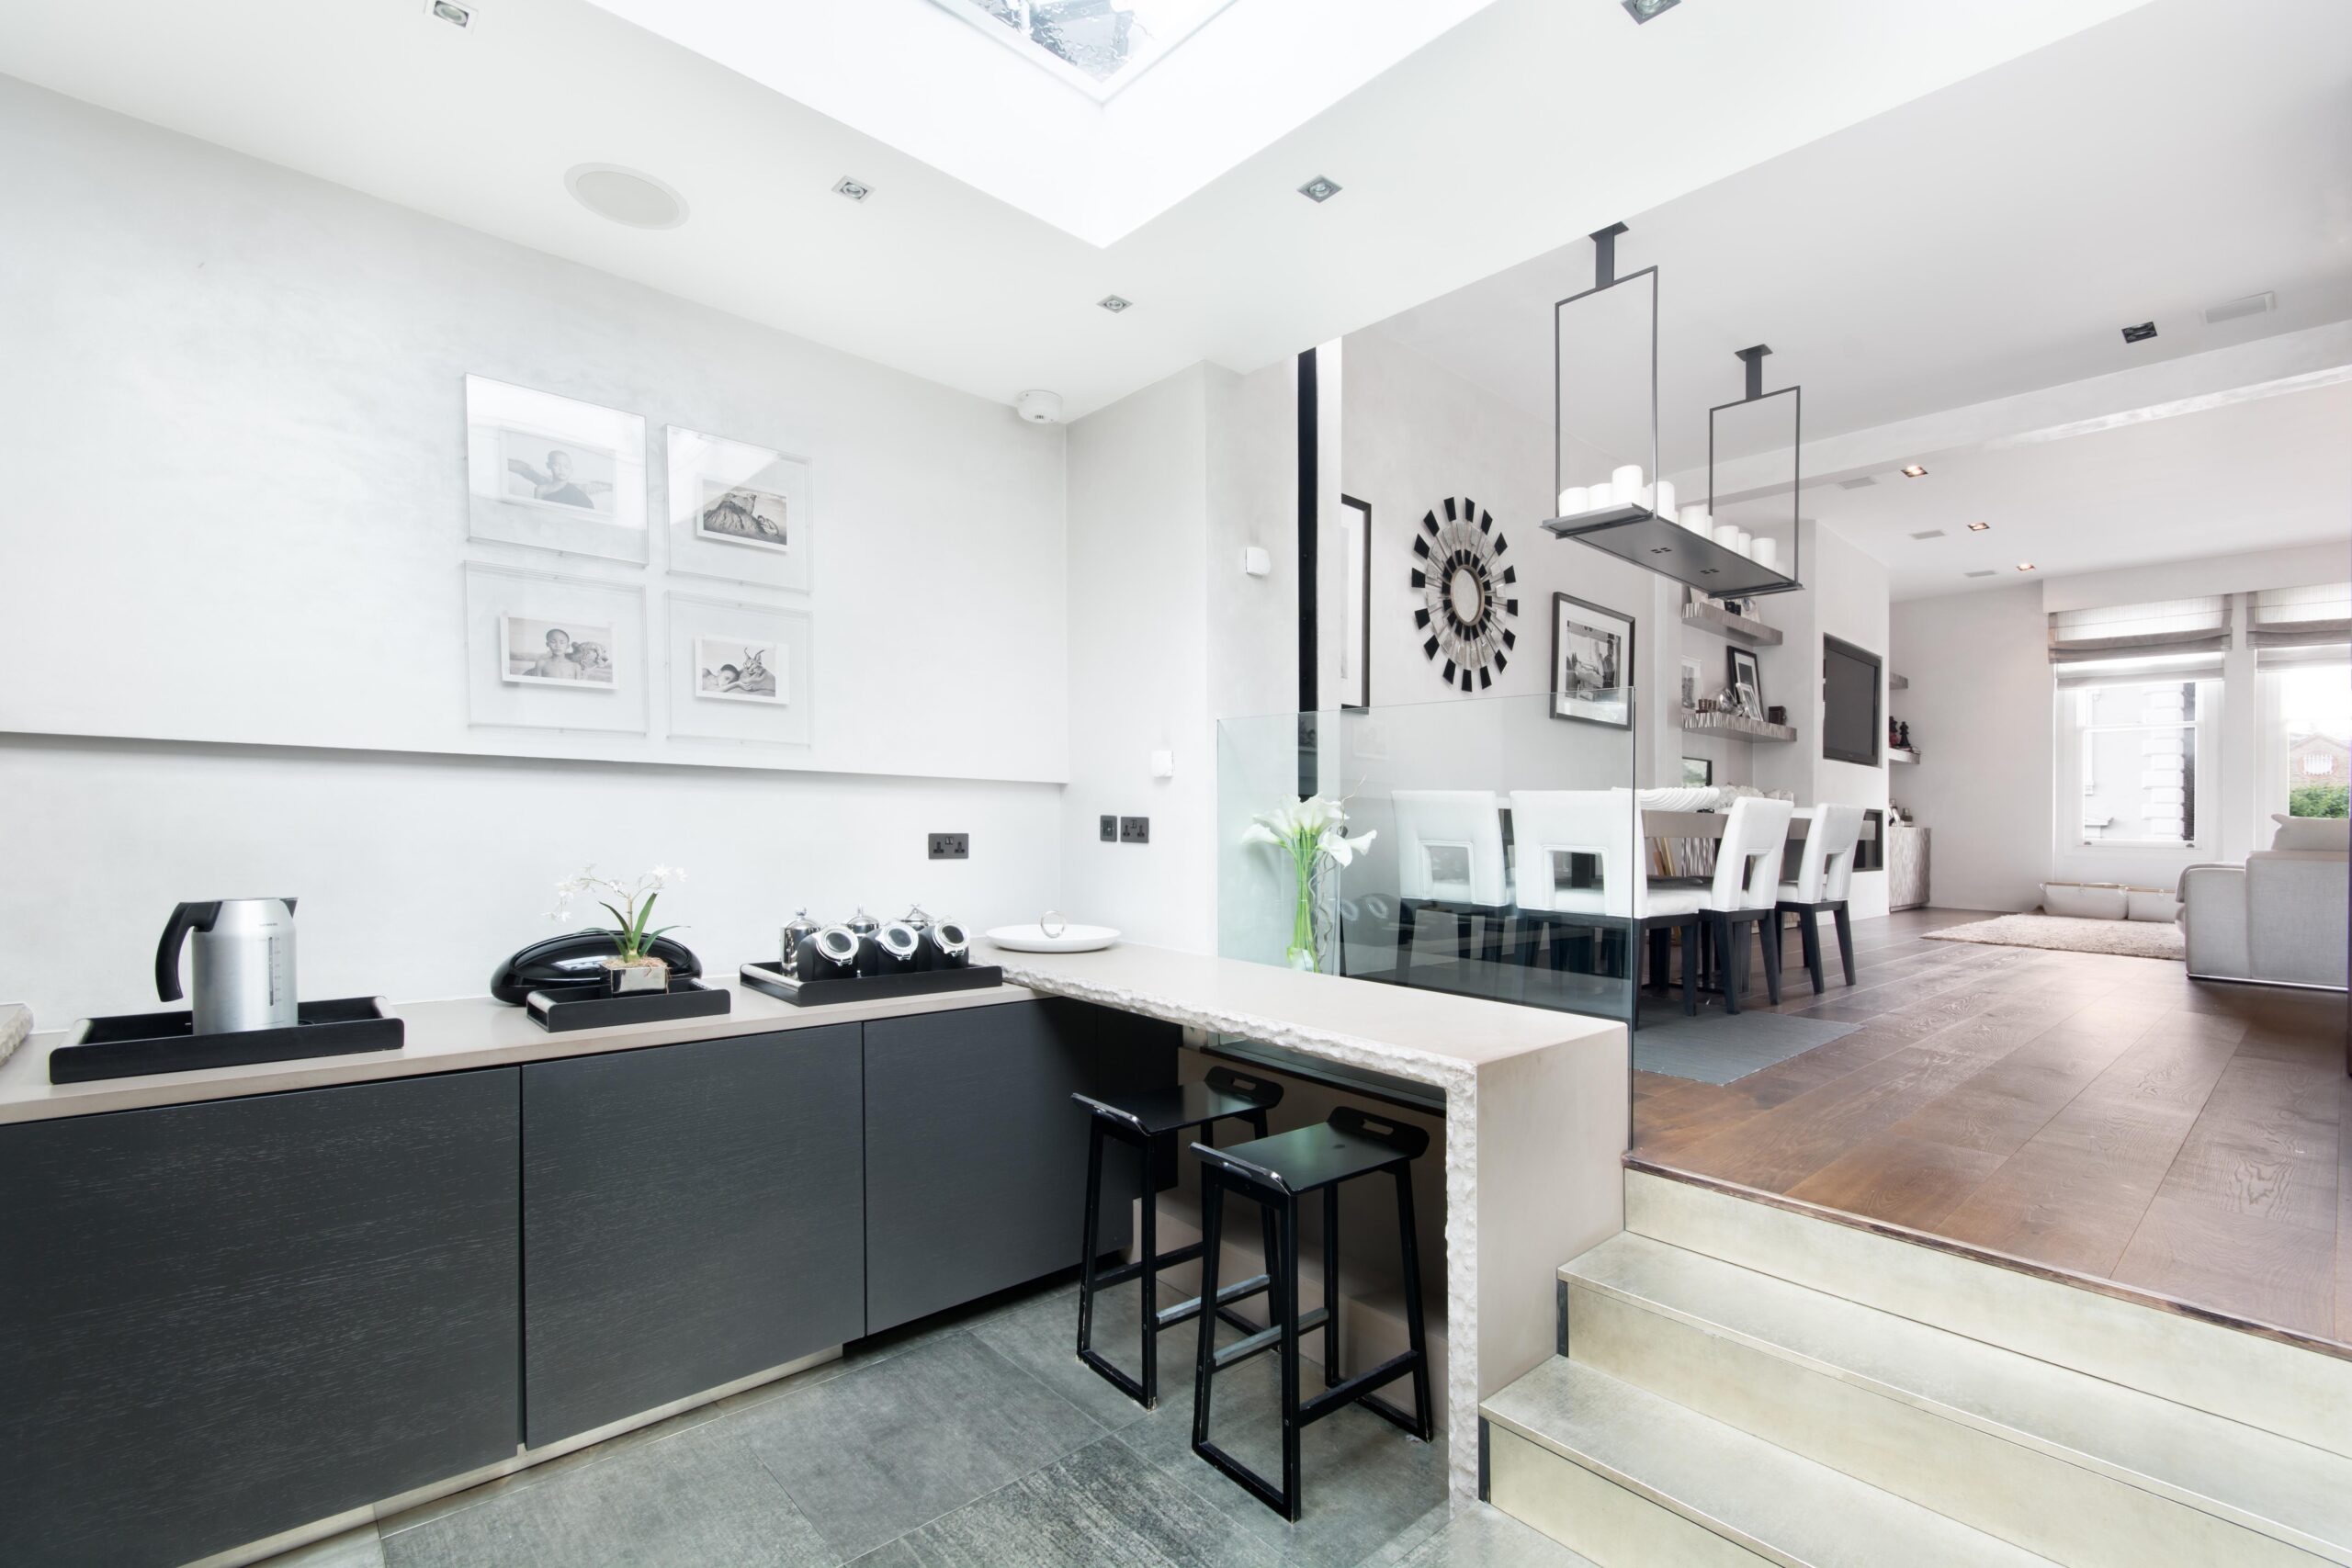 For Sale: Westbourne Grove Notting Hill W11 modern dining room and kitchen with skylight